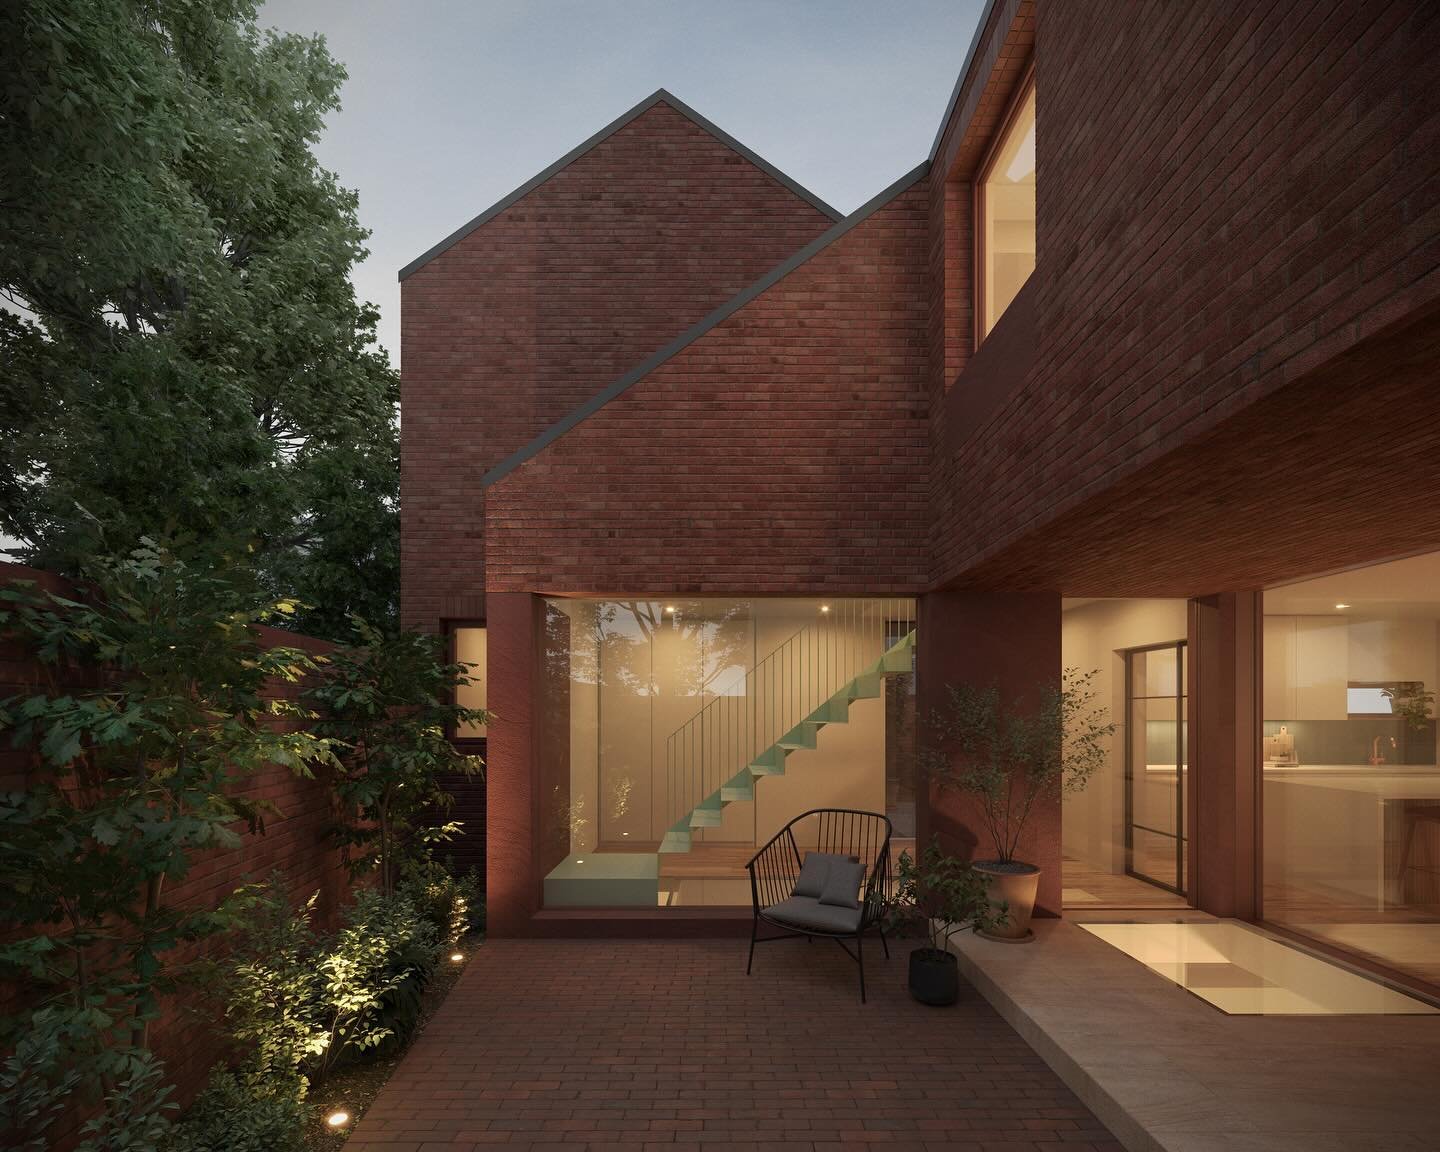 A modern interpretation of the local vernacular, our latest concept design unveils a bespoke family home in Didsbury Village. 

Tackling a heavily constrained site, the volume of the house is comprised of two simple extruded gable forms connected by